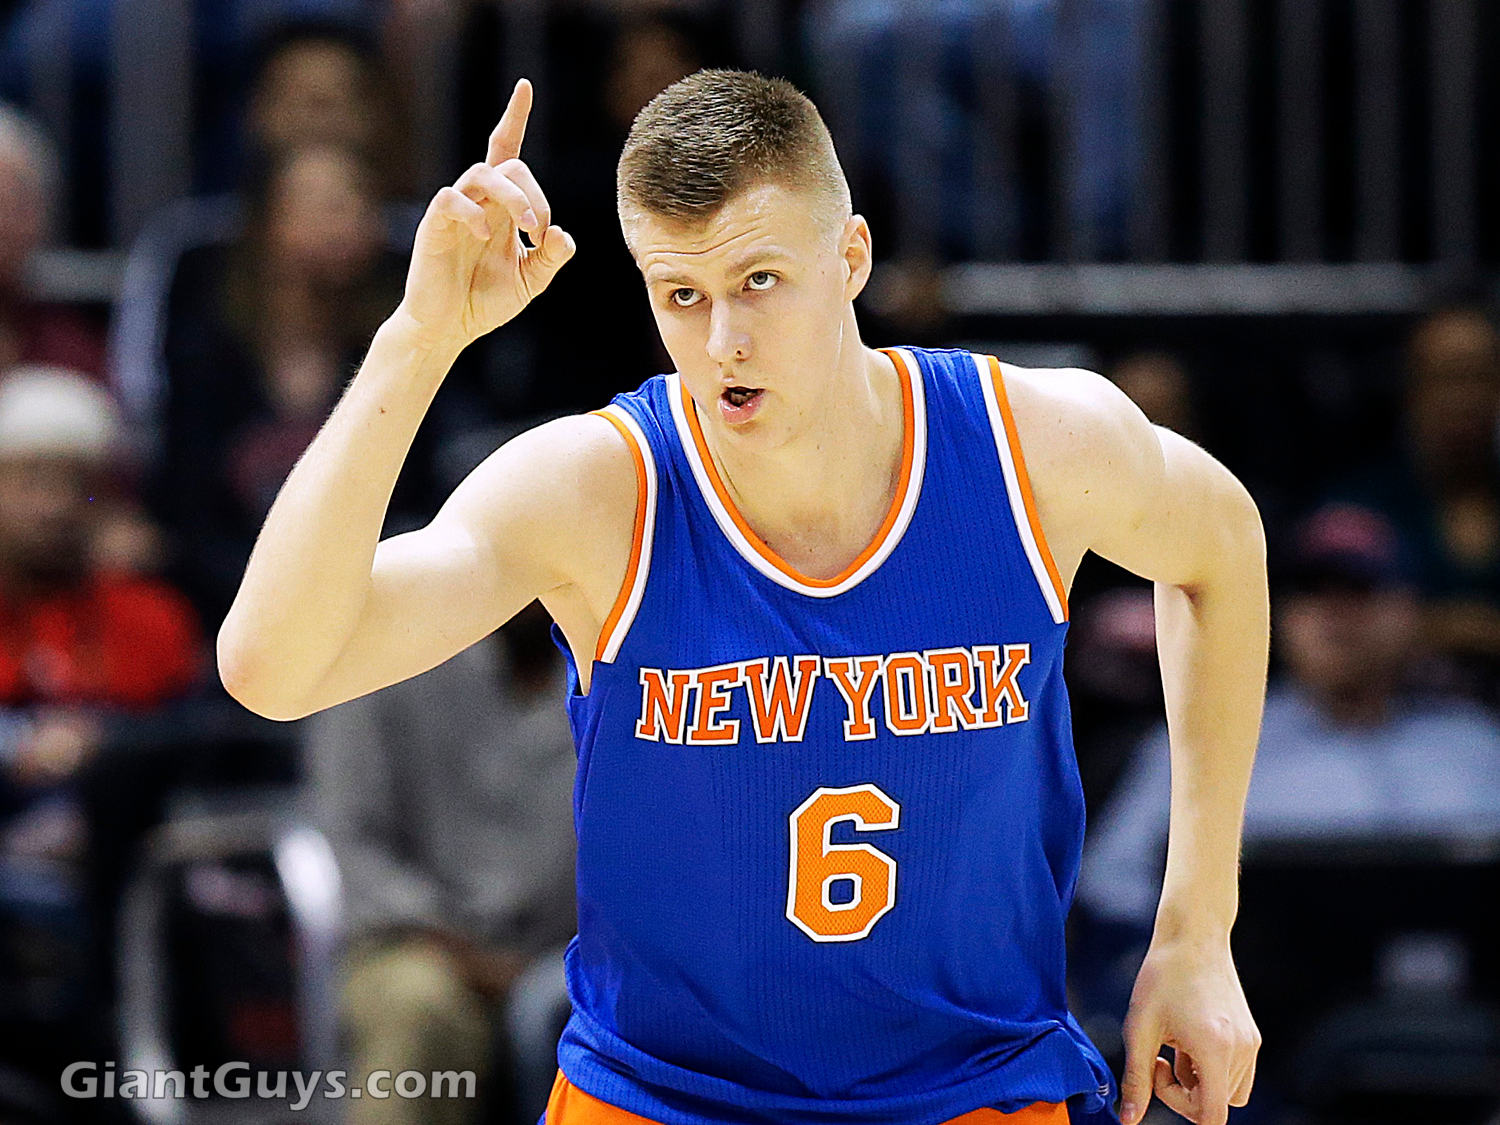 knicks-player-has-an-awesome-story-about-the-moment-he-knew-kristaps-porzingis-was-ready-for-the-nba